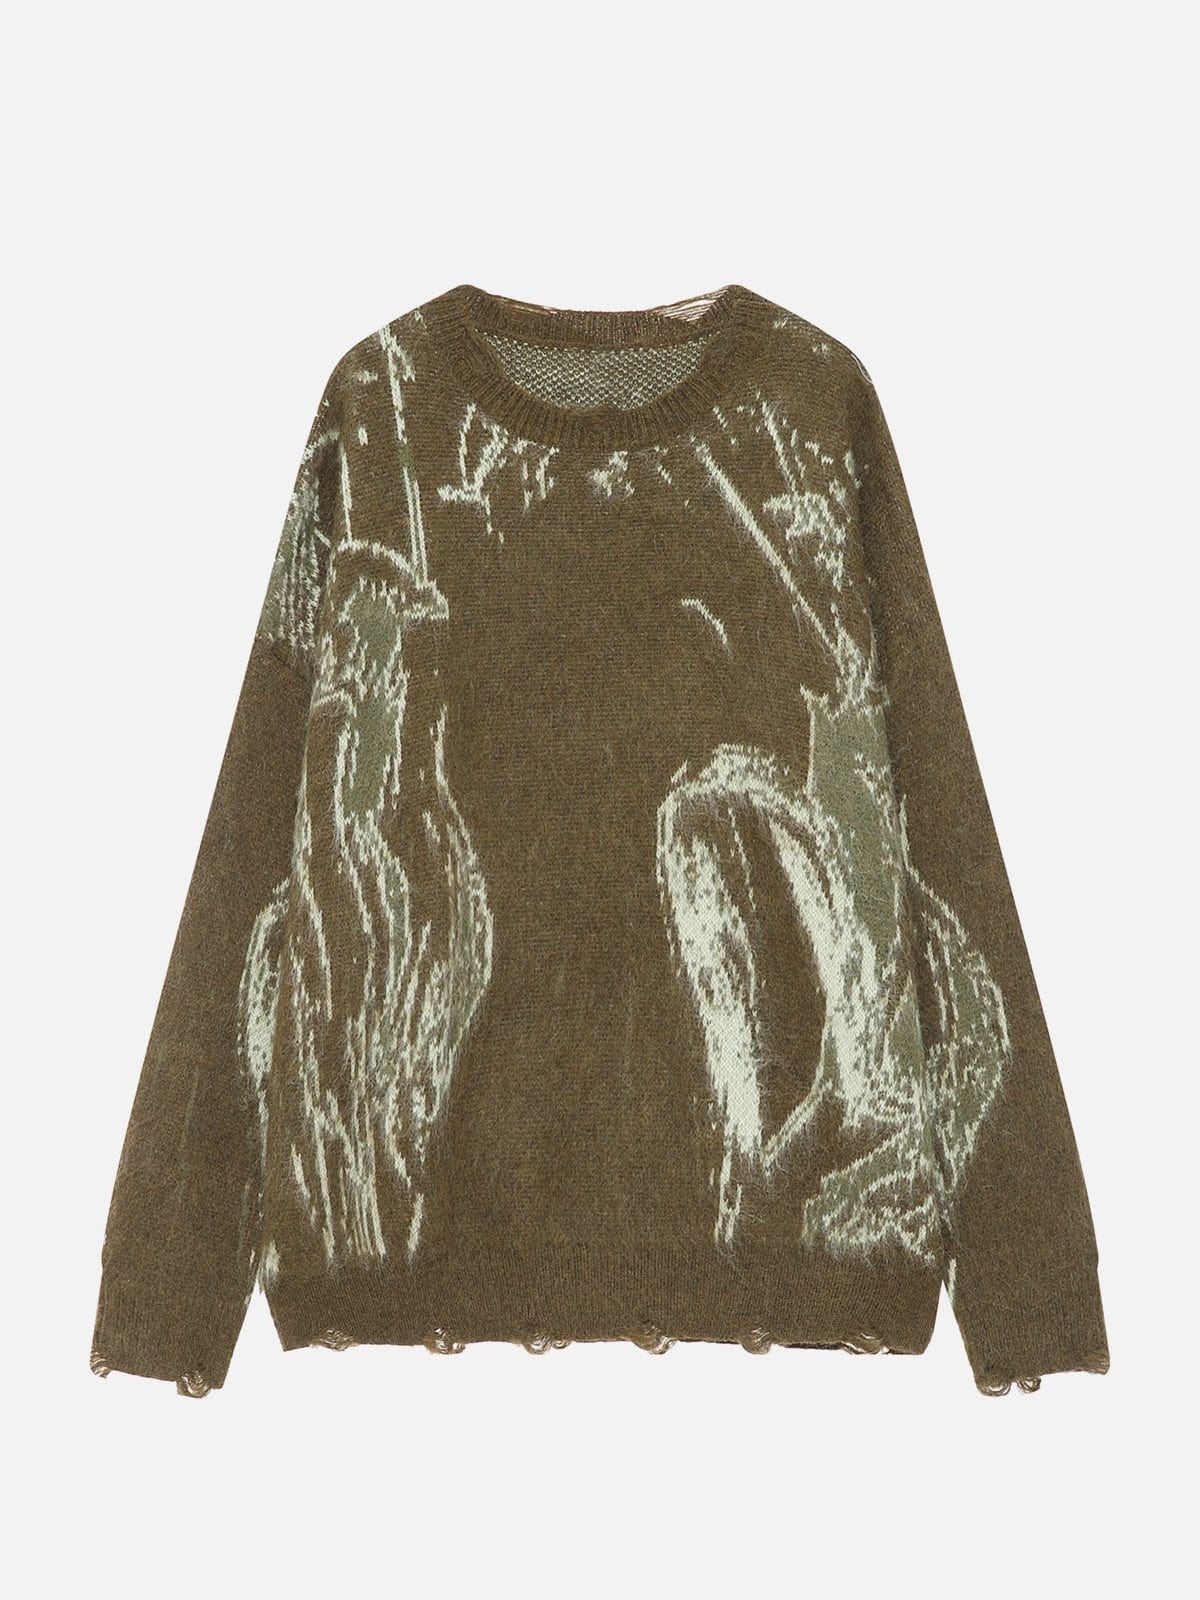 NEV Distressed Abstract Design Sweater